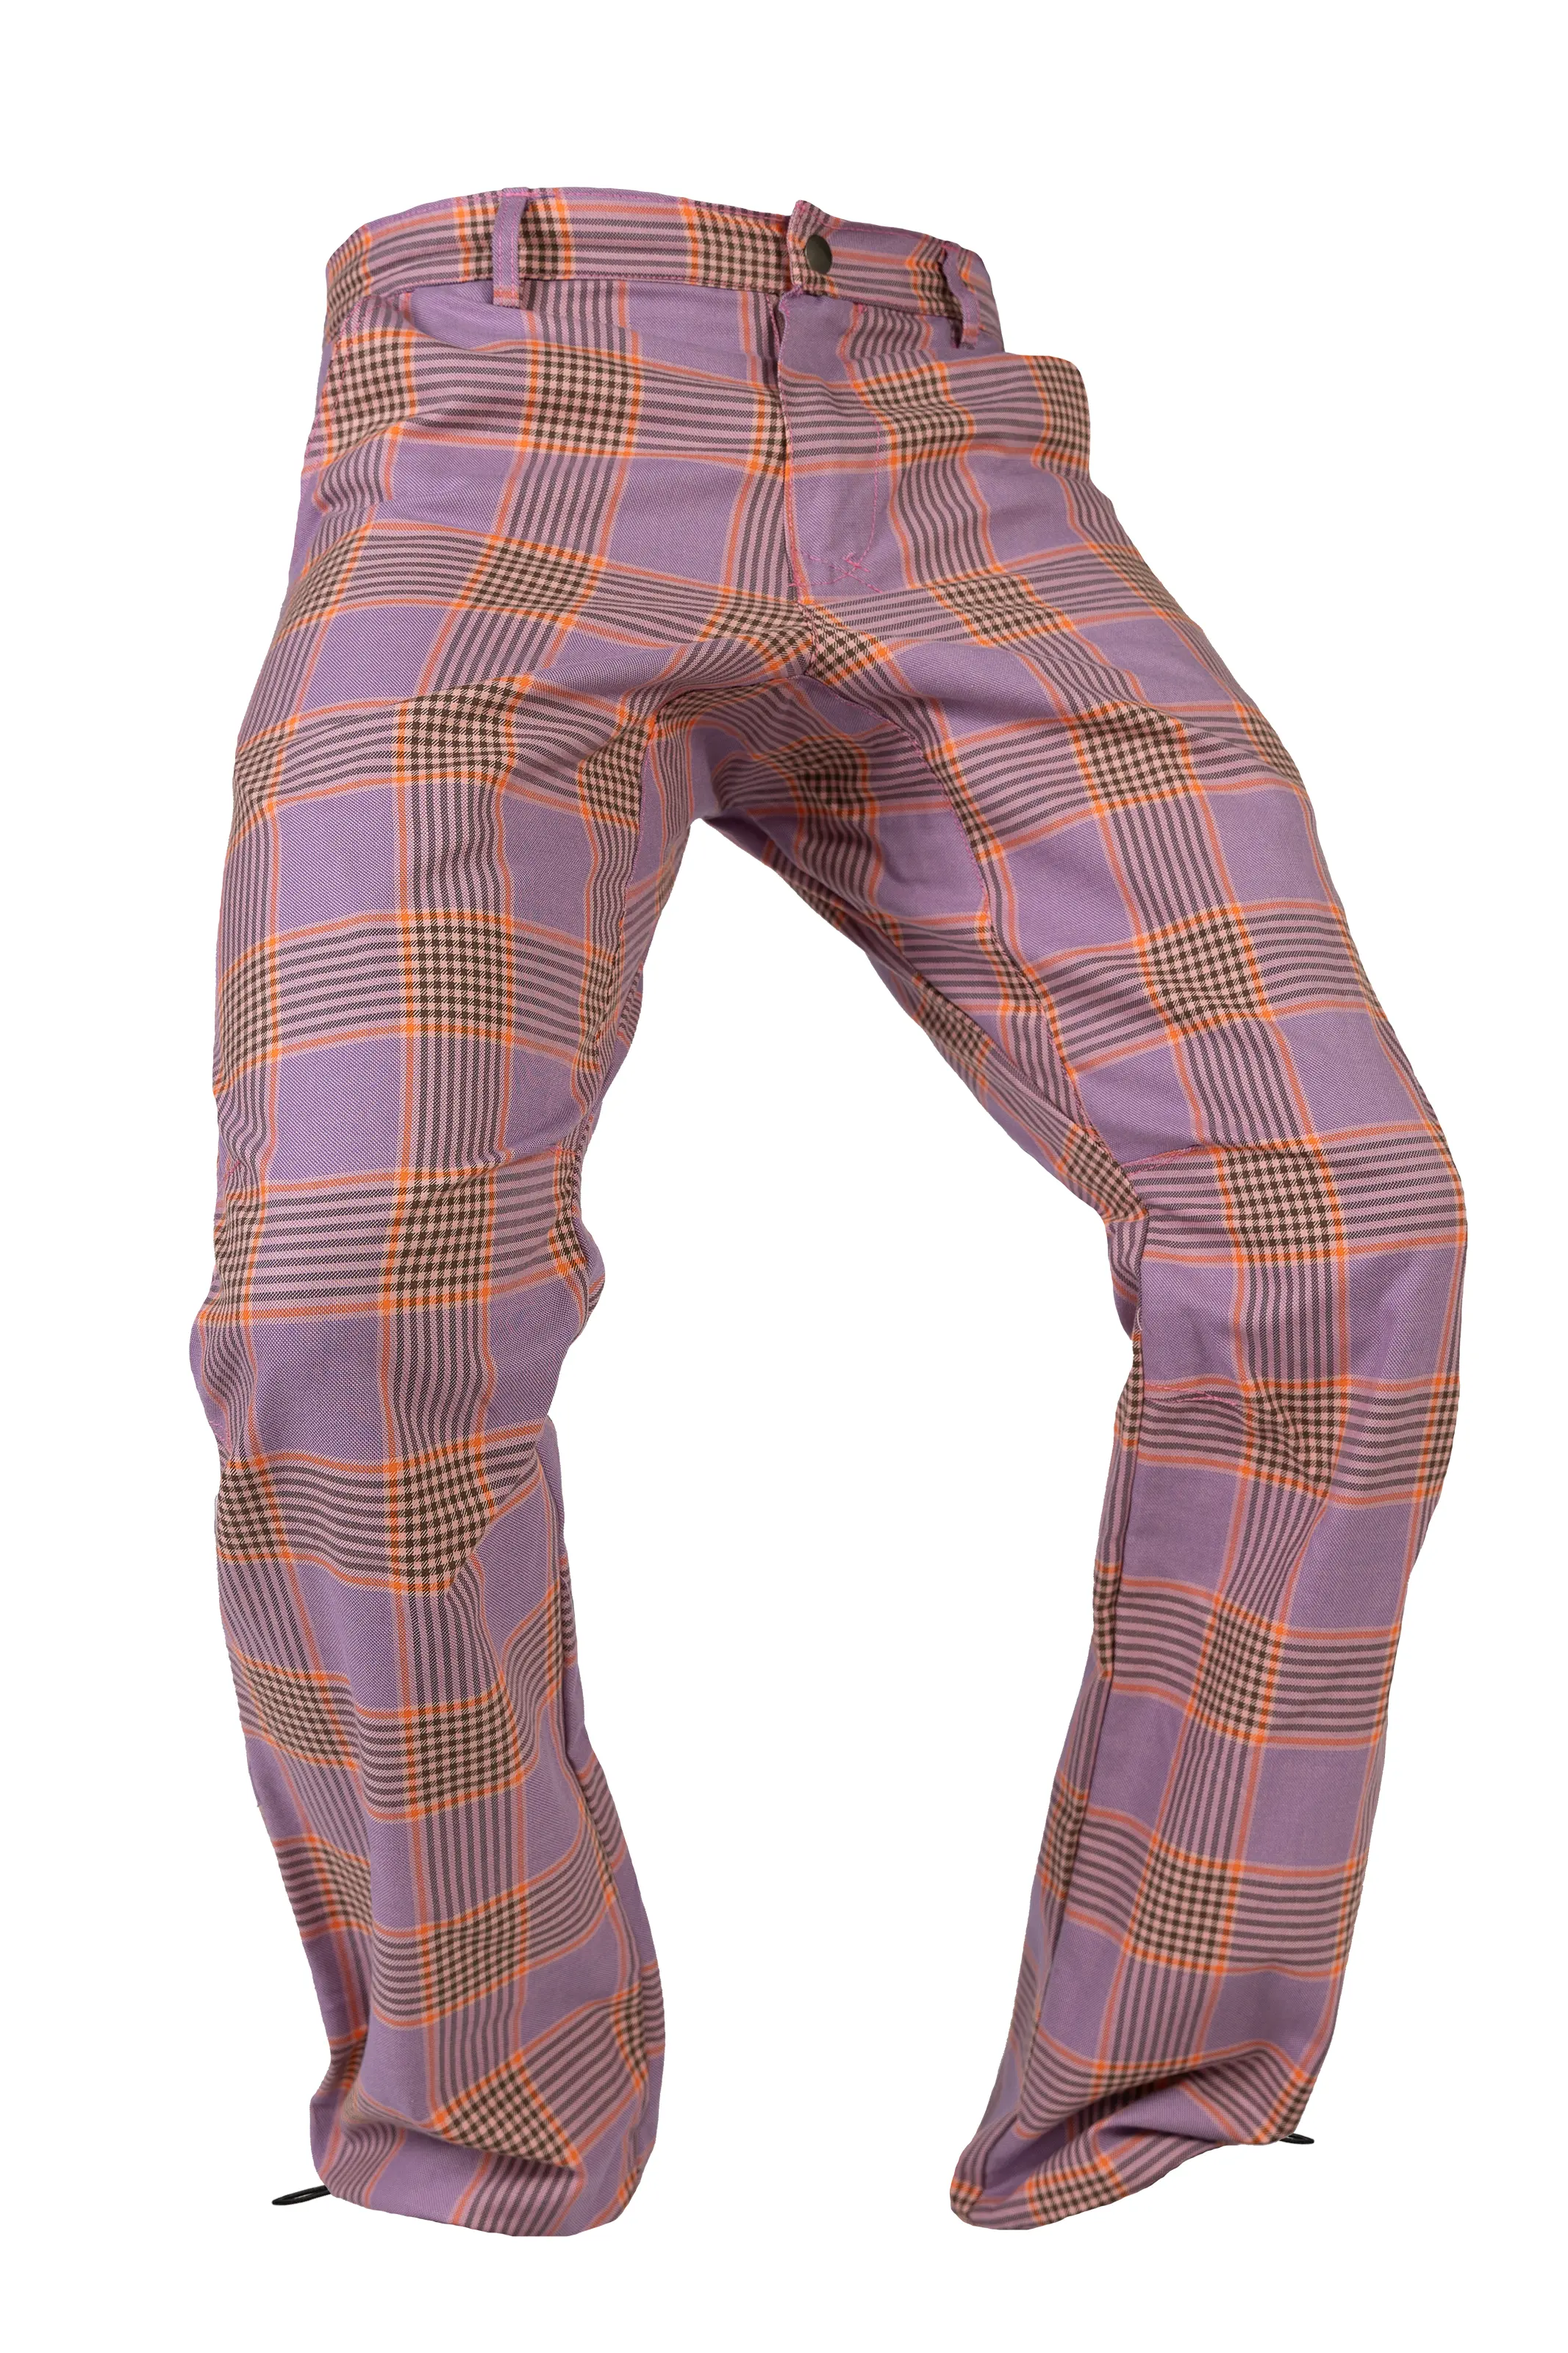 Checked men's climbing trousers - pink-orange-brown - BILLY 2 Monvic